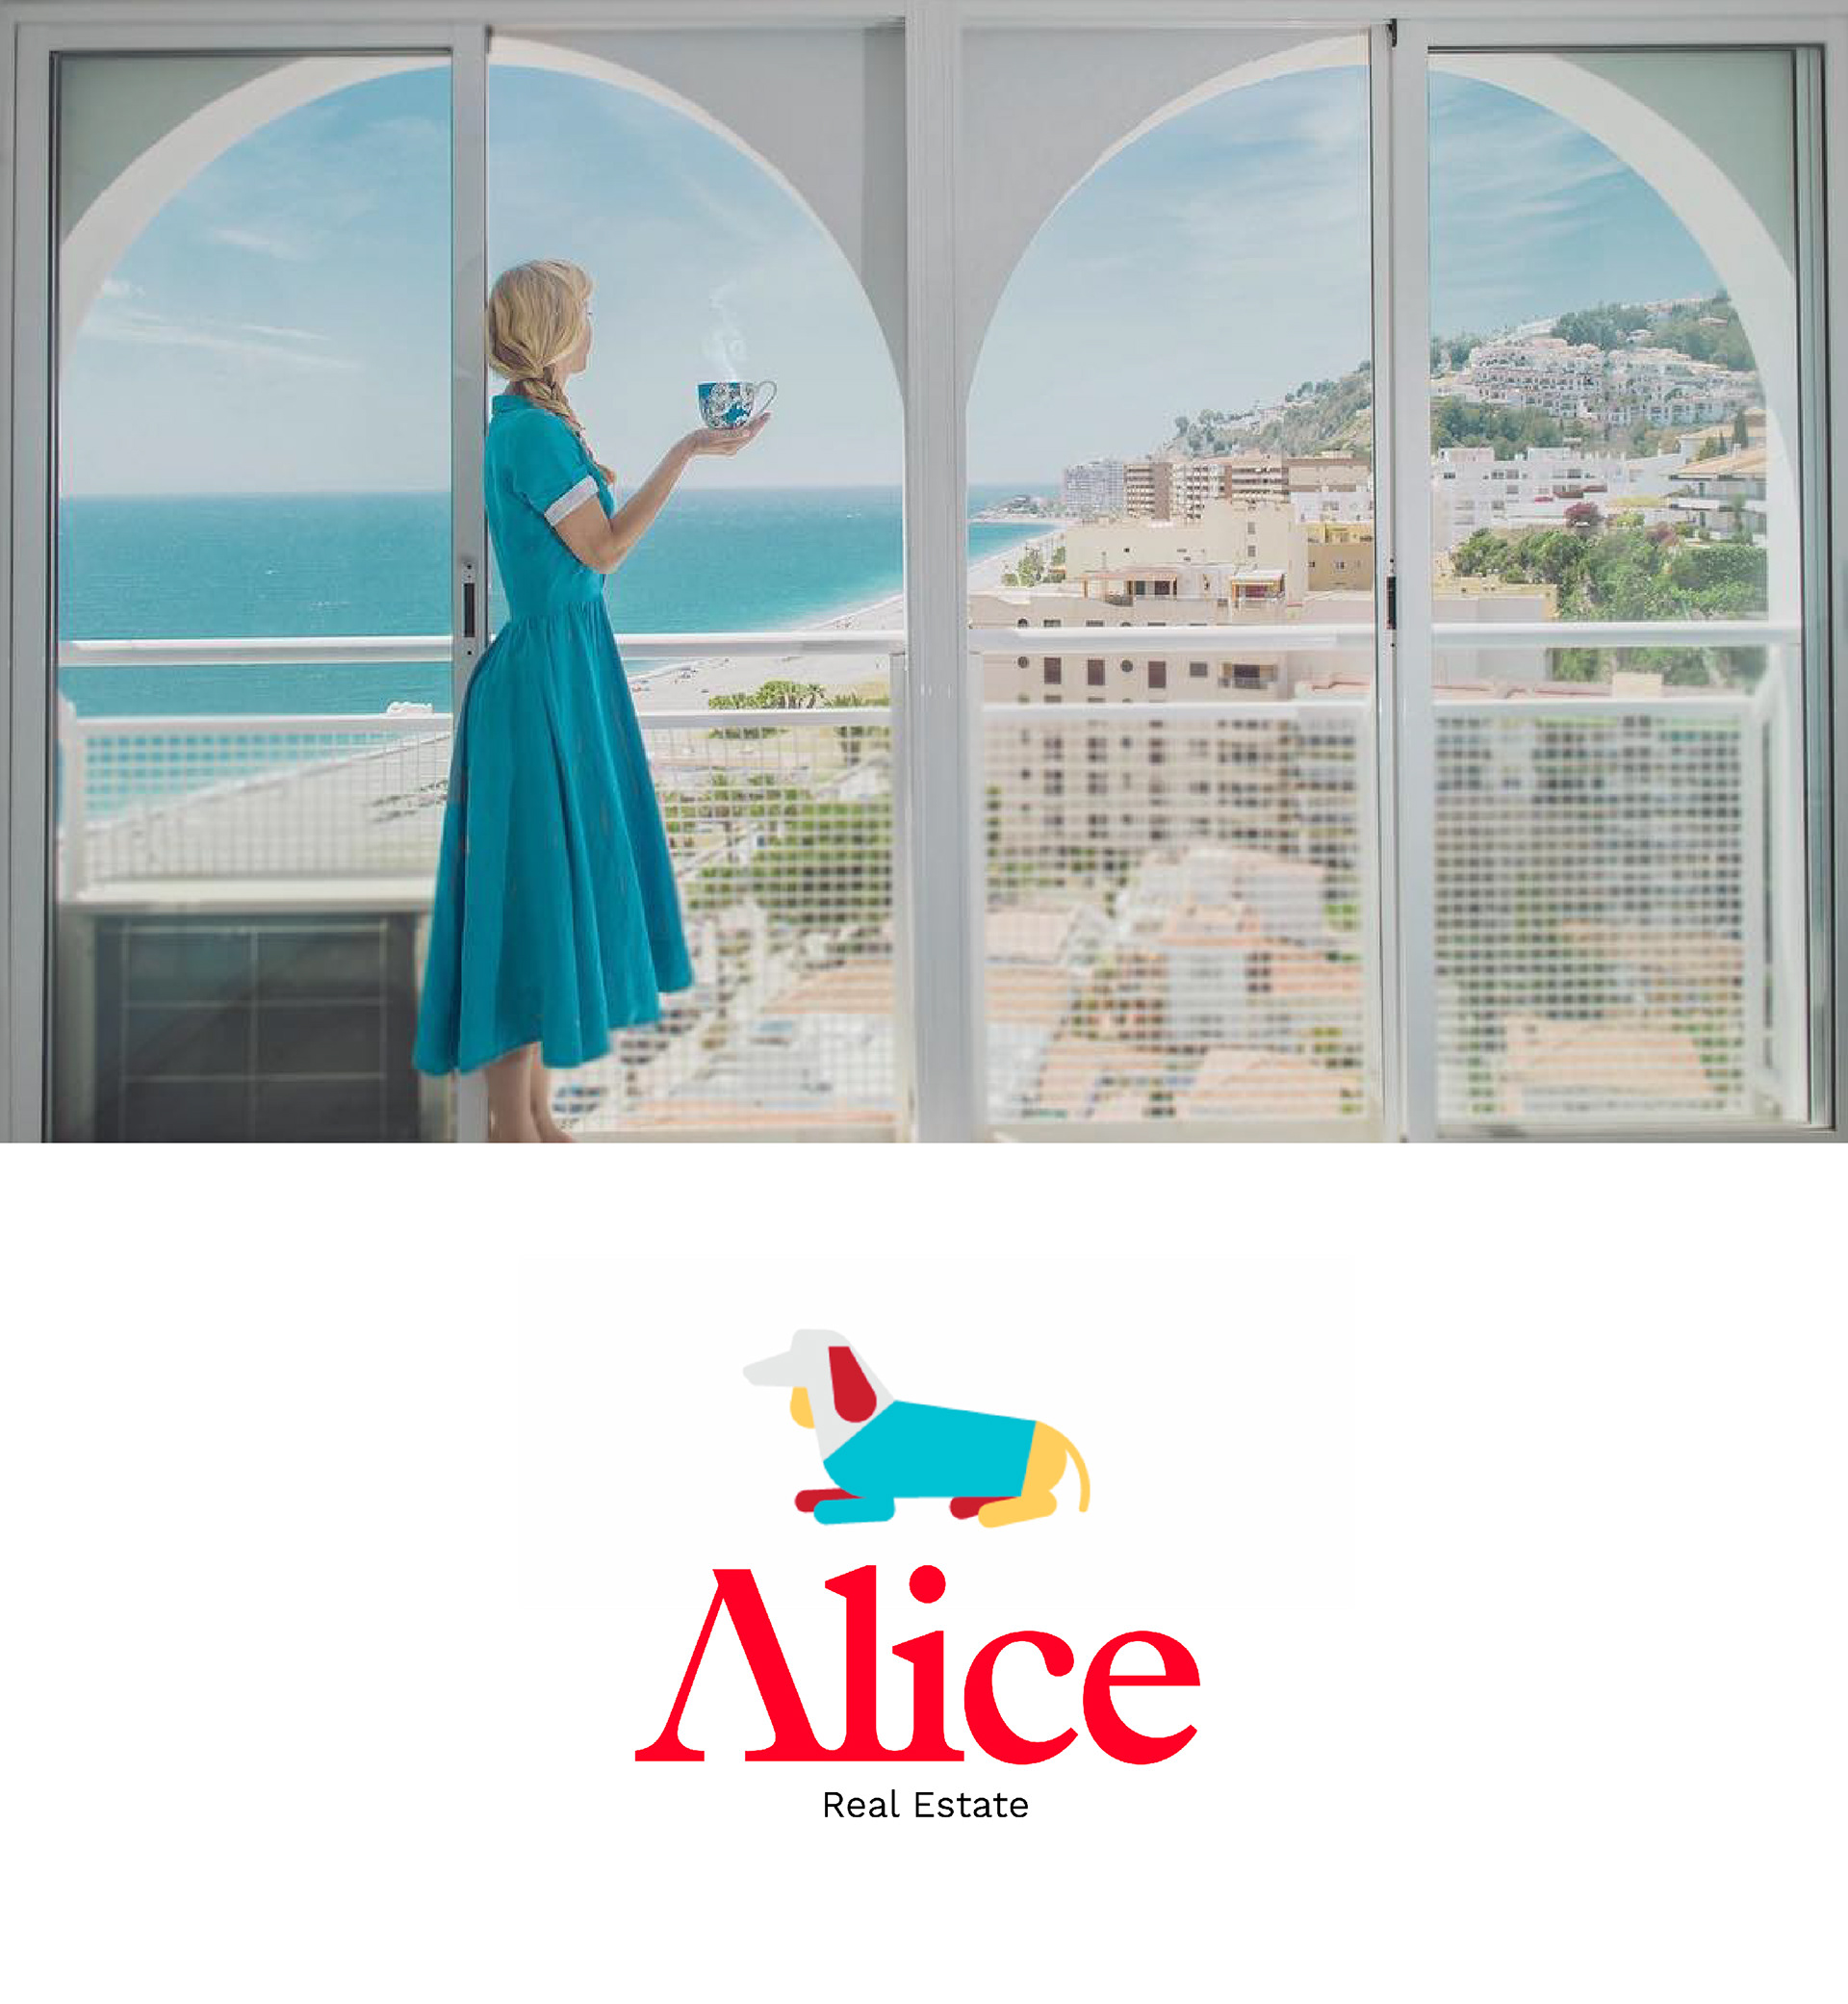 ALICE REAL STATE WEB SITE